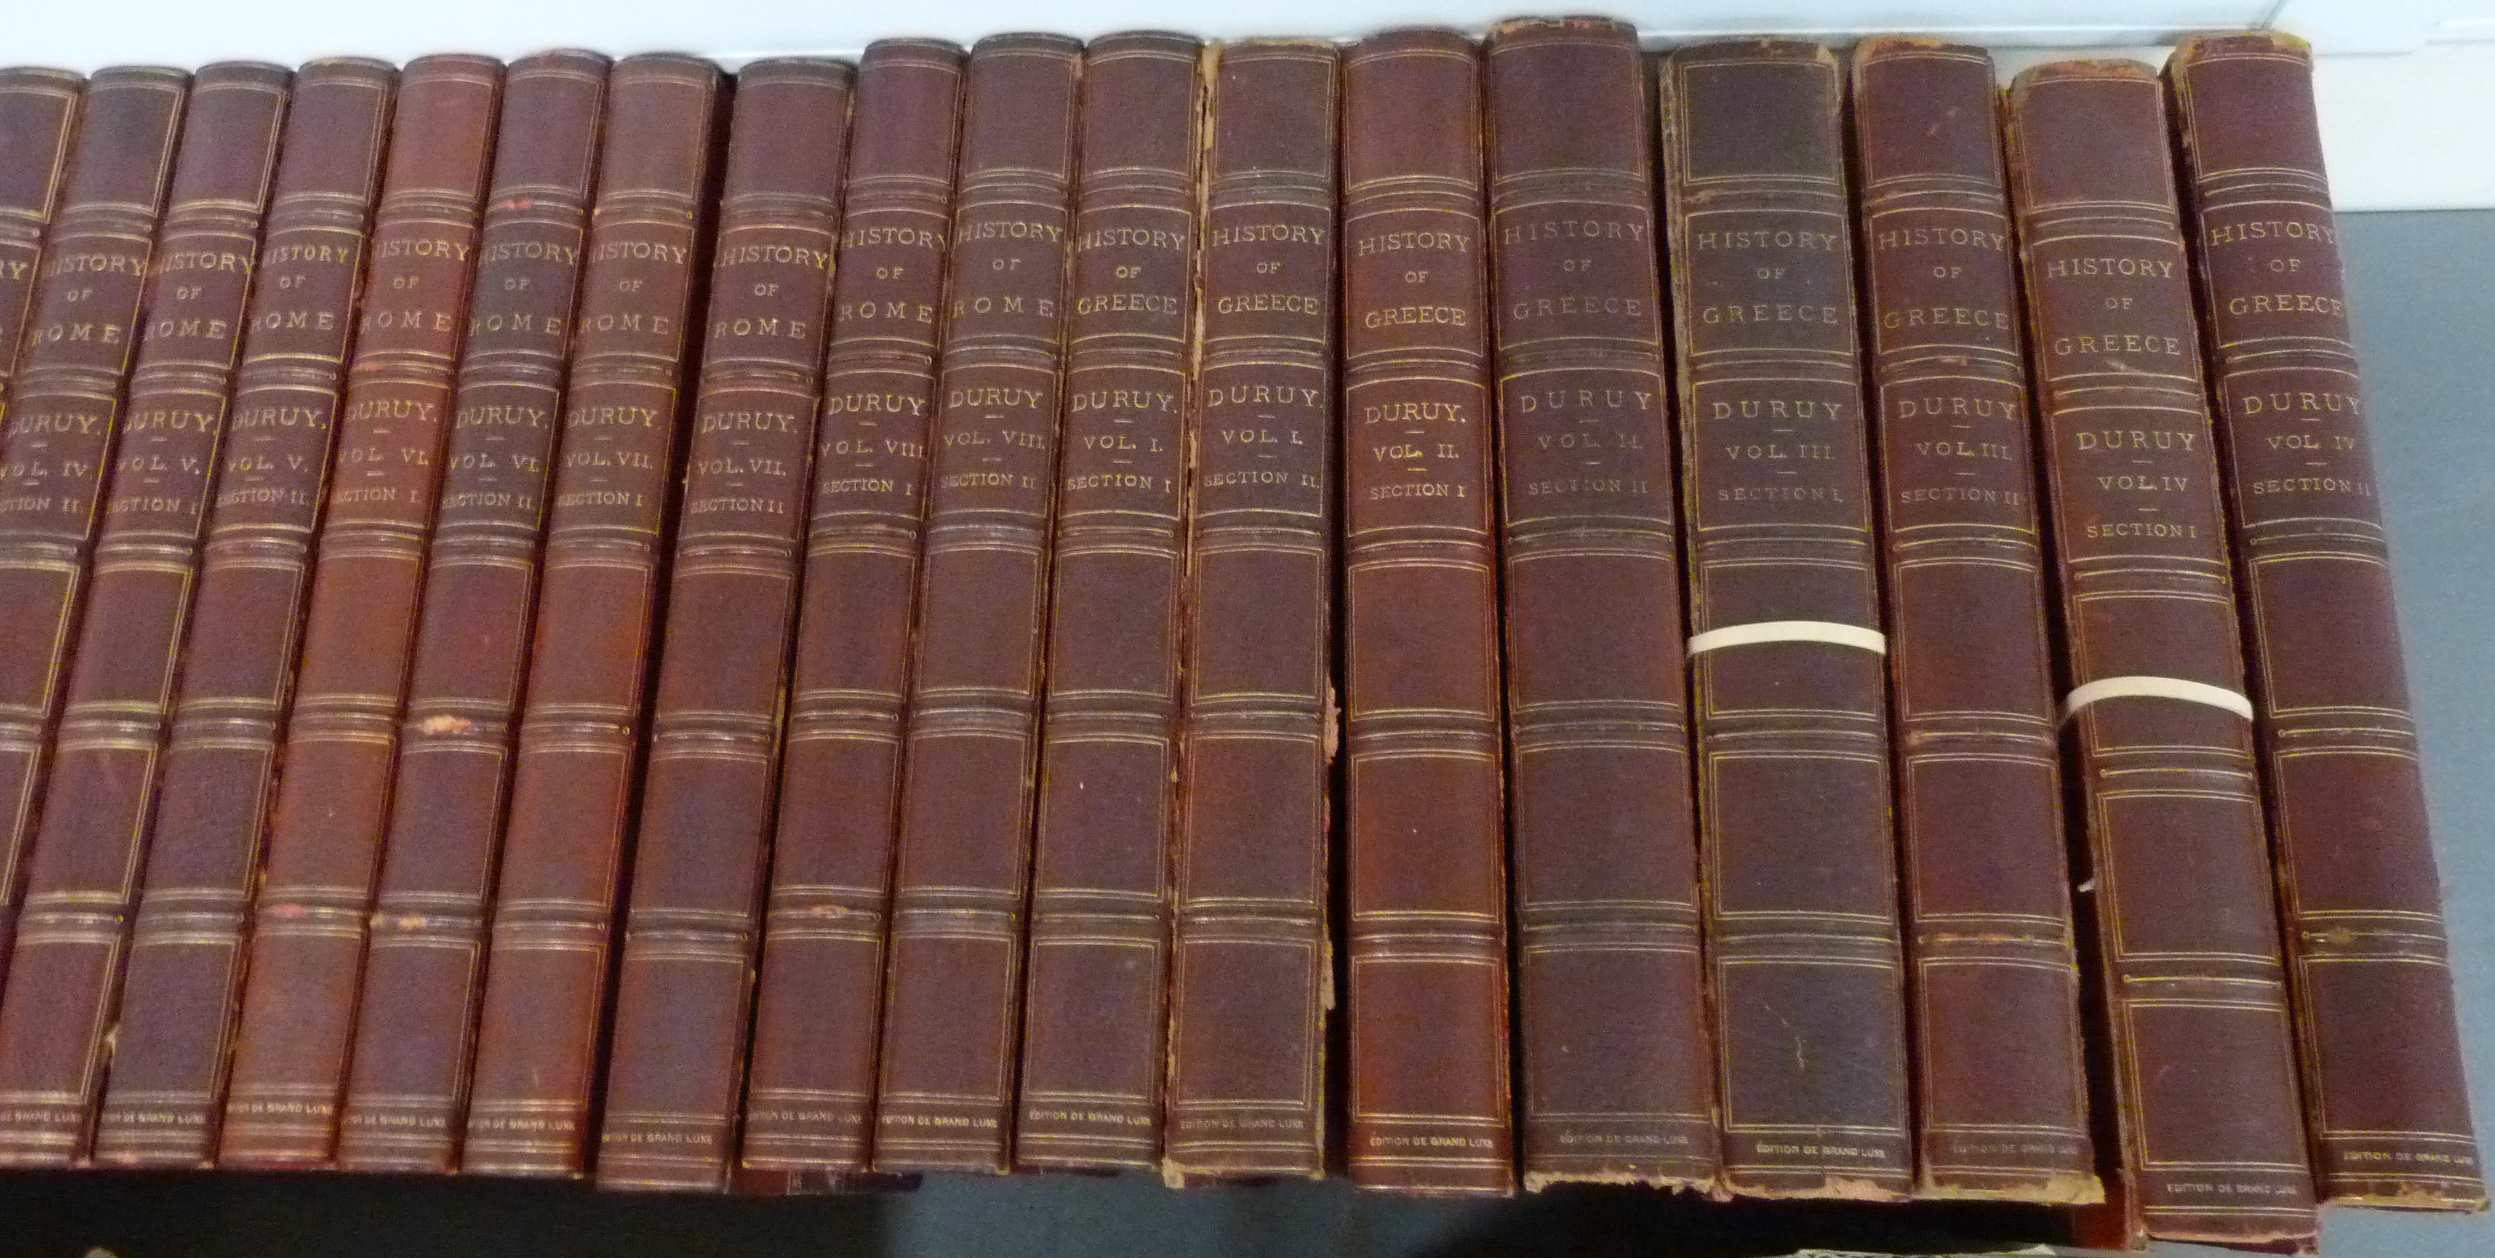 DURUY VICTOR.  History of Rome & the Roman People, 8 vols. in sixteen & History of Greece & of the - Image 2 of 2